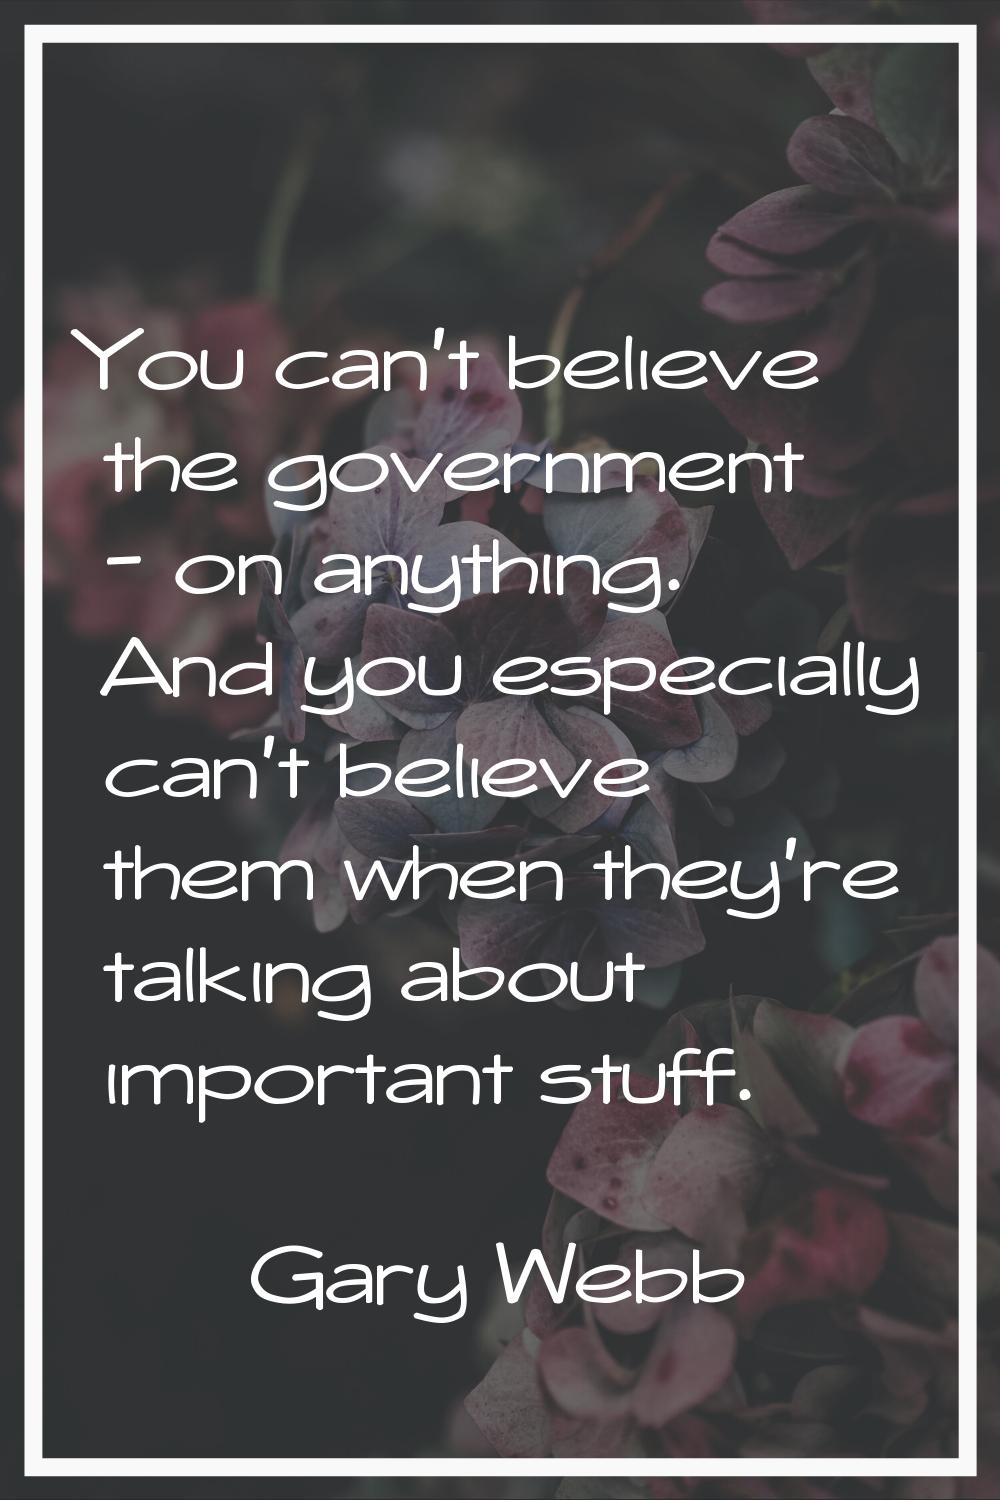 You can't believe the government - on anything. And you especially can't believe them when they're 